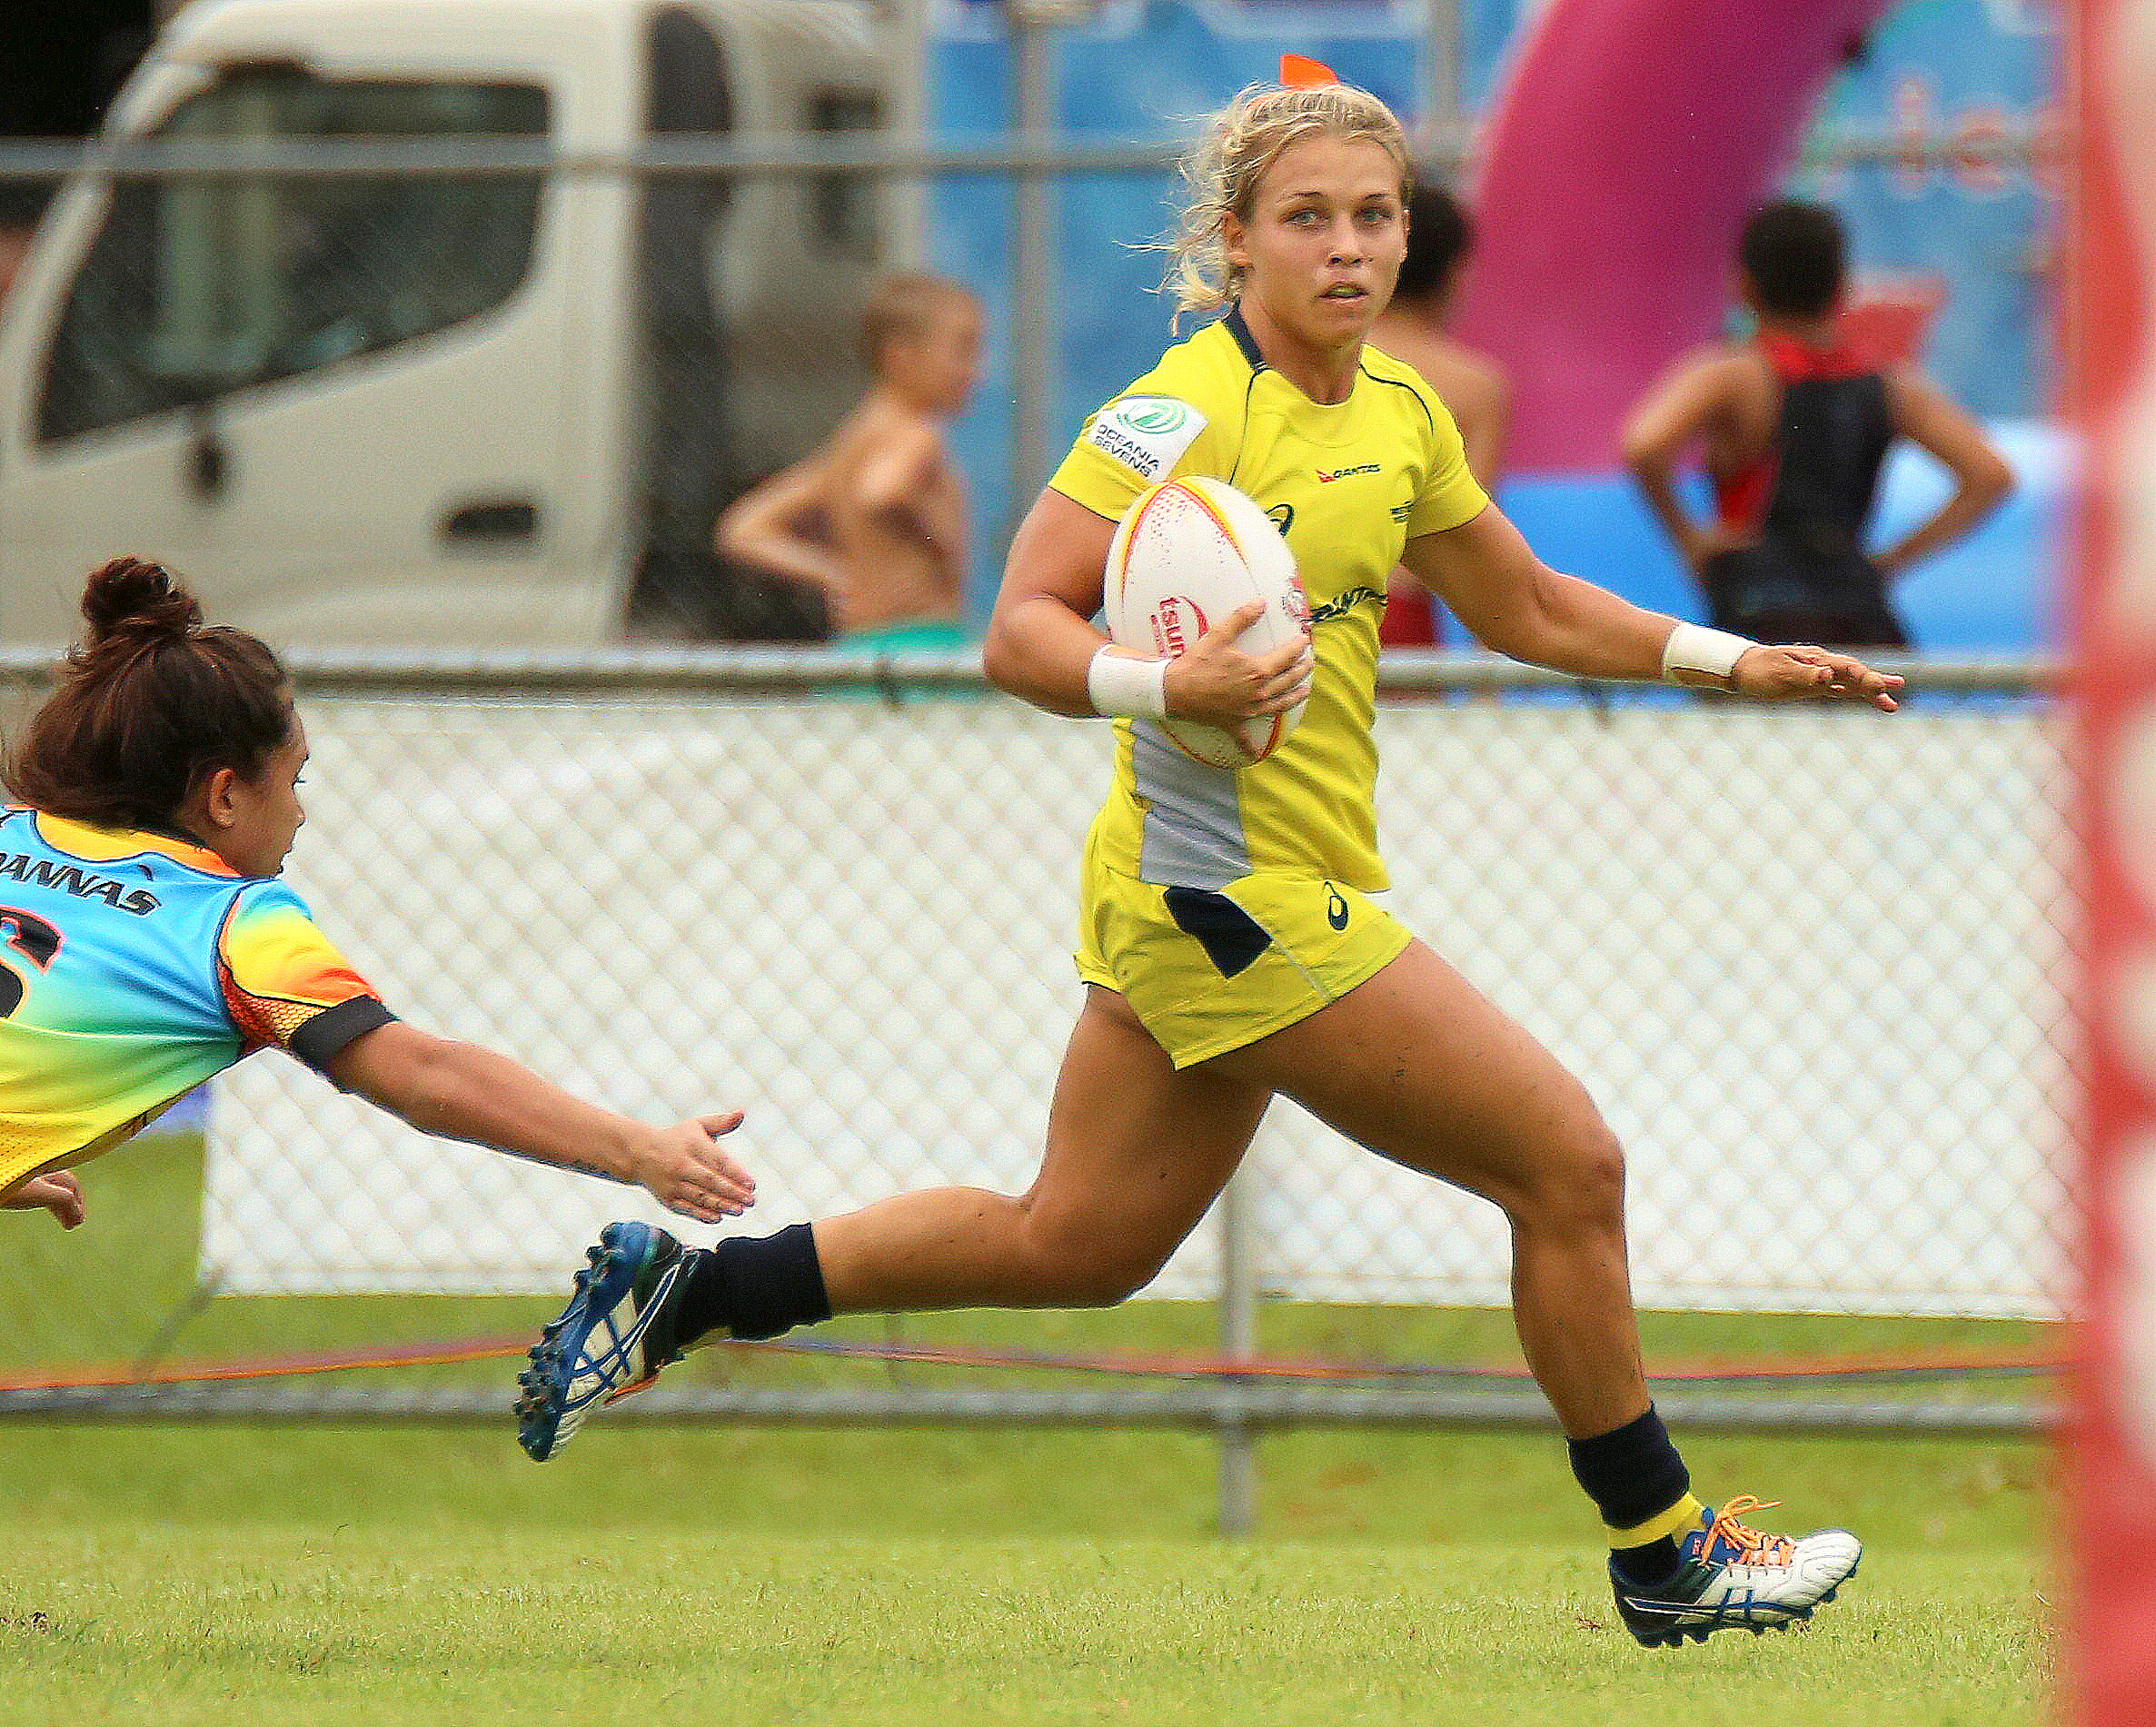 Australia player Georgina Friedrichs is one of two business students to be named as Griffith's marquis players for the AON Women's Rugby Uni 7.